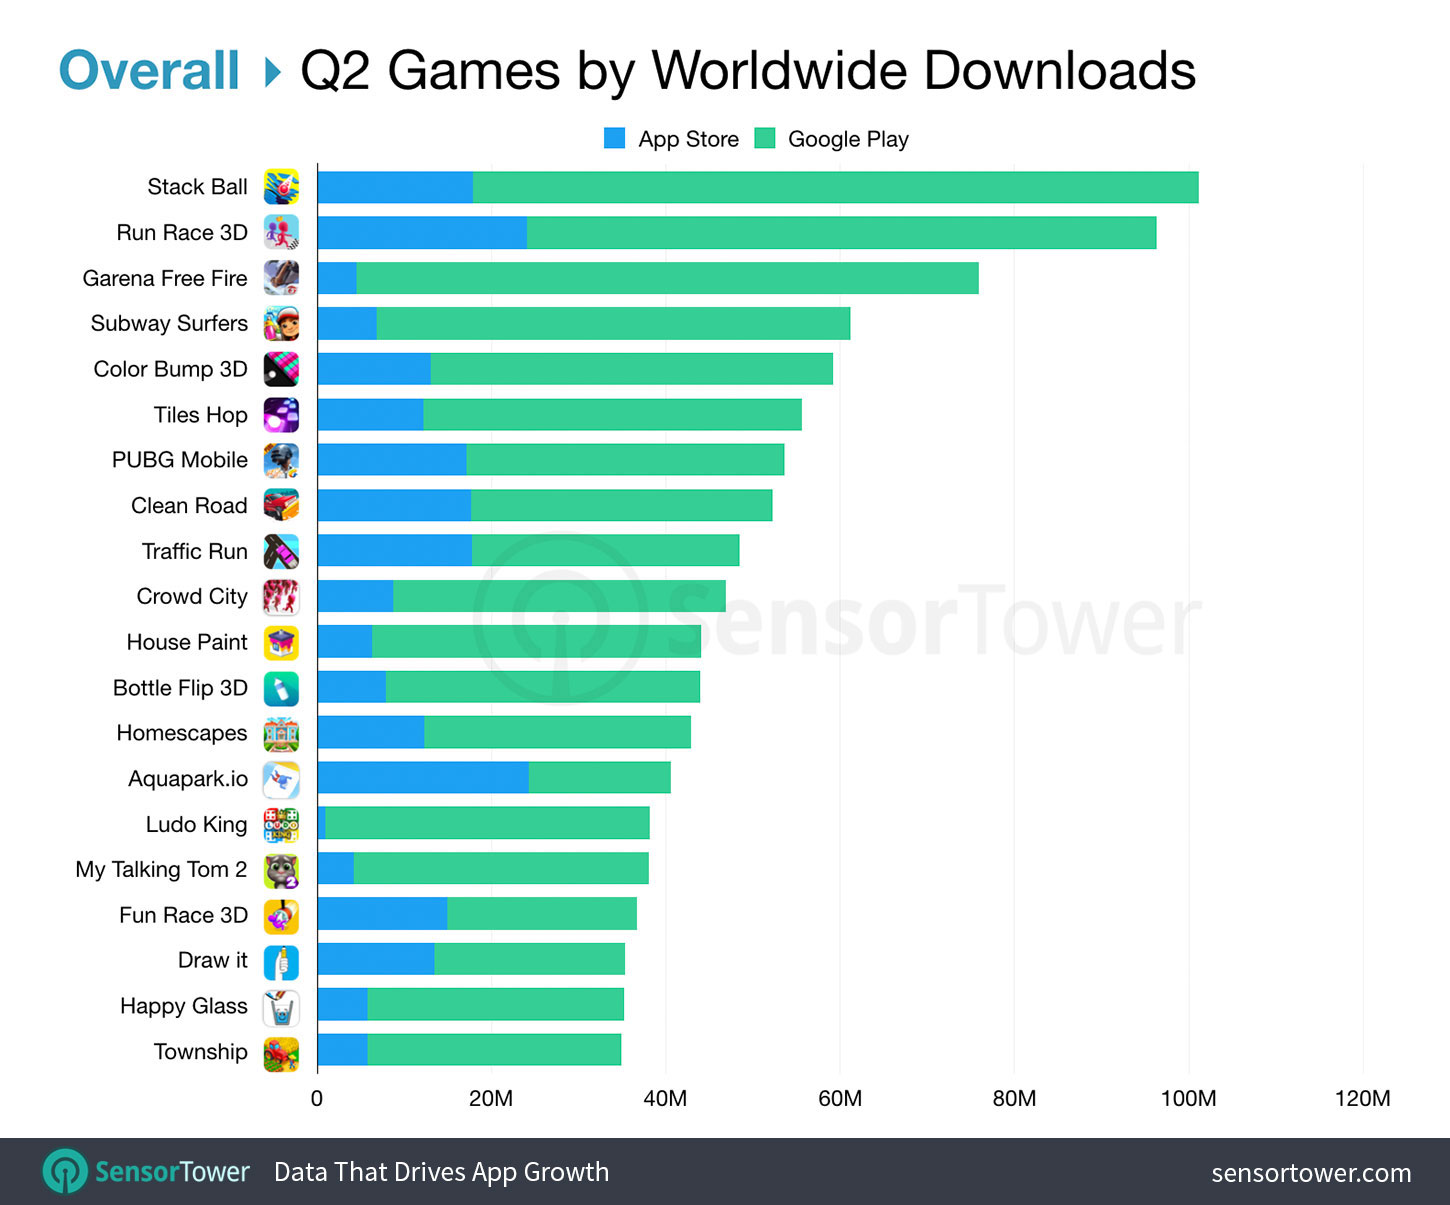 Top Games Worldwide Overall for Q2 2019